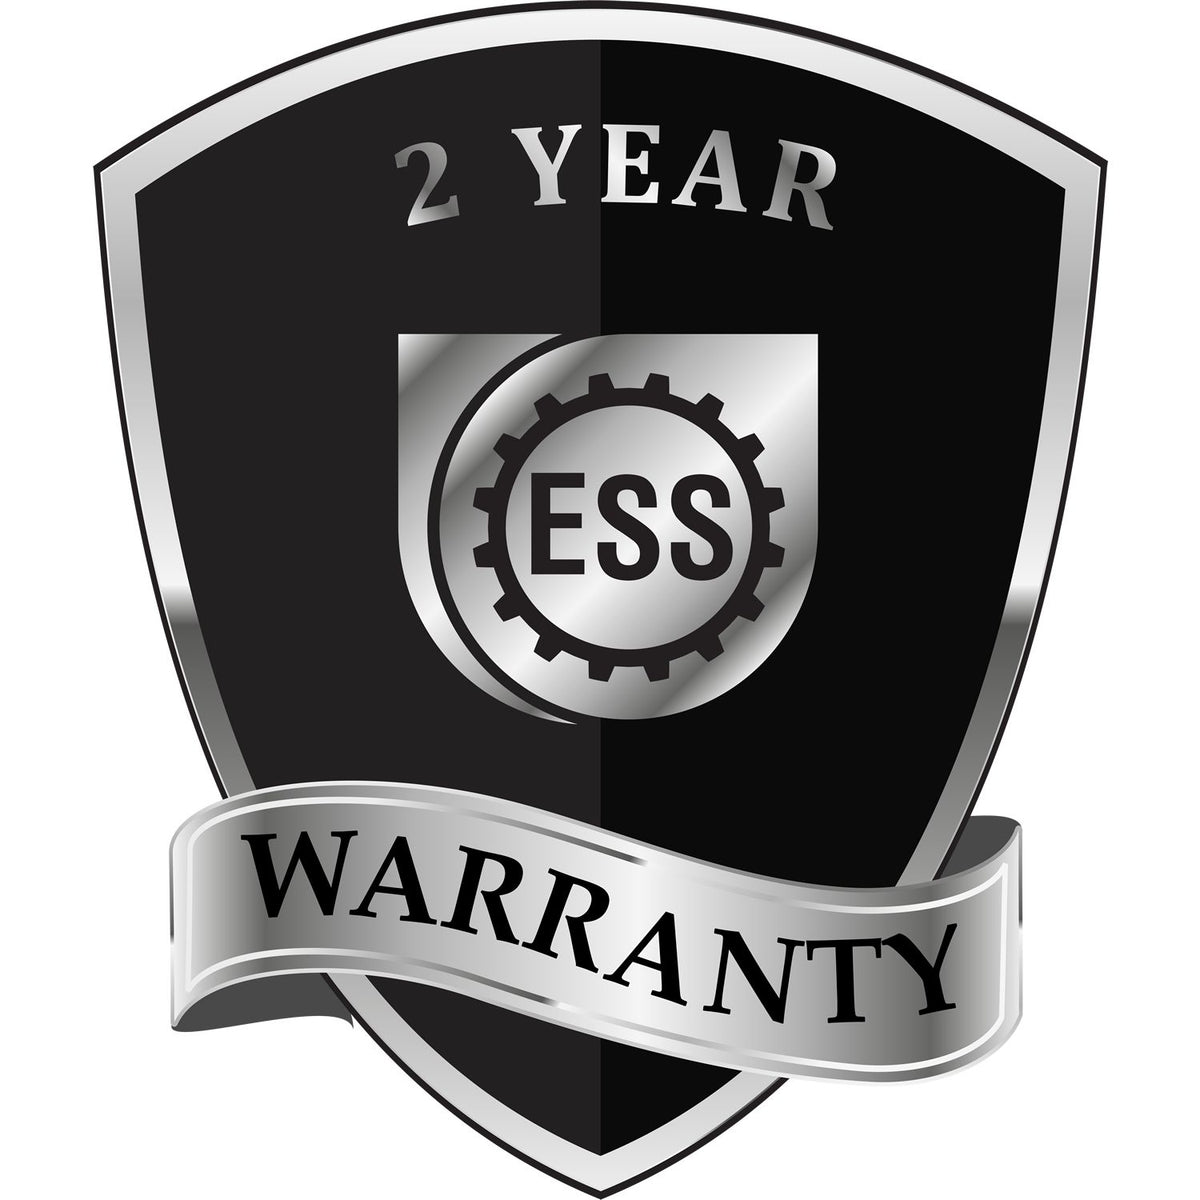 A badge or emblem showing a warranty icon for the Heavy Duty Cast Iron Iowa Architect Embosser